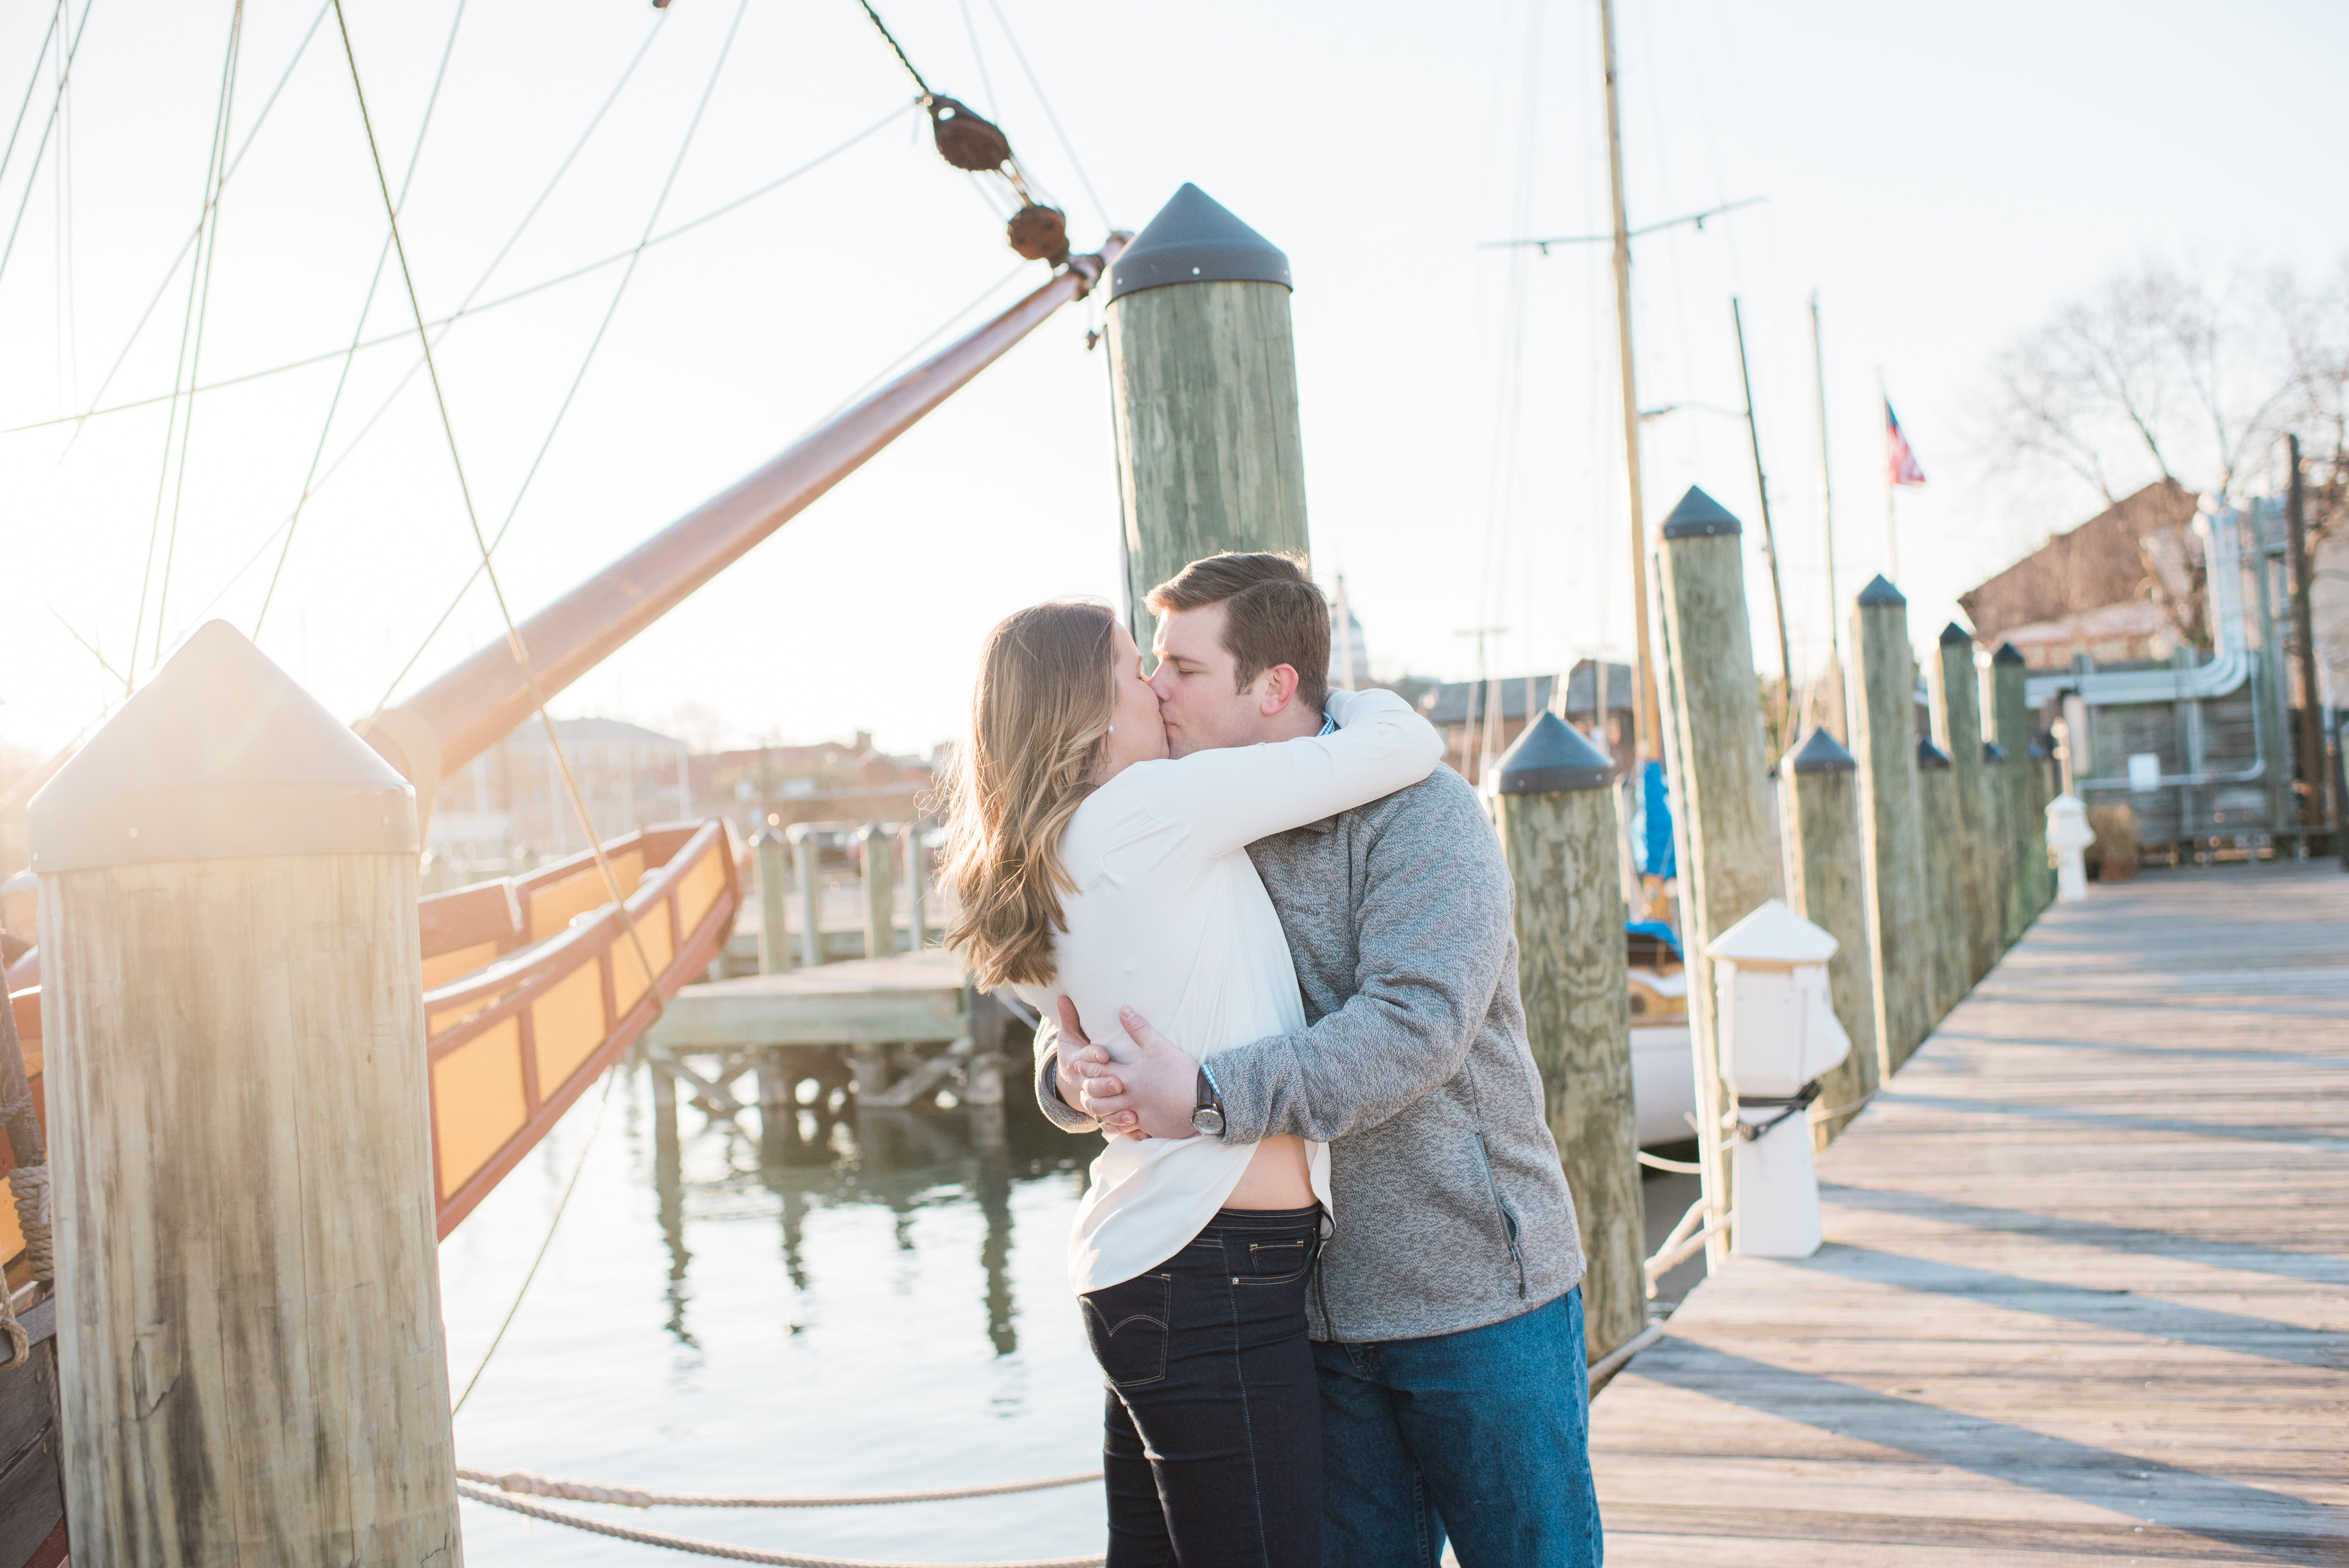 Stacey and Chris | Annapolis Engagement Photographer | Brittney Livingston Photography (1)